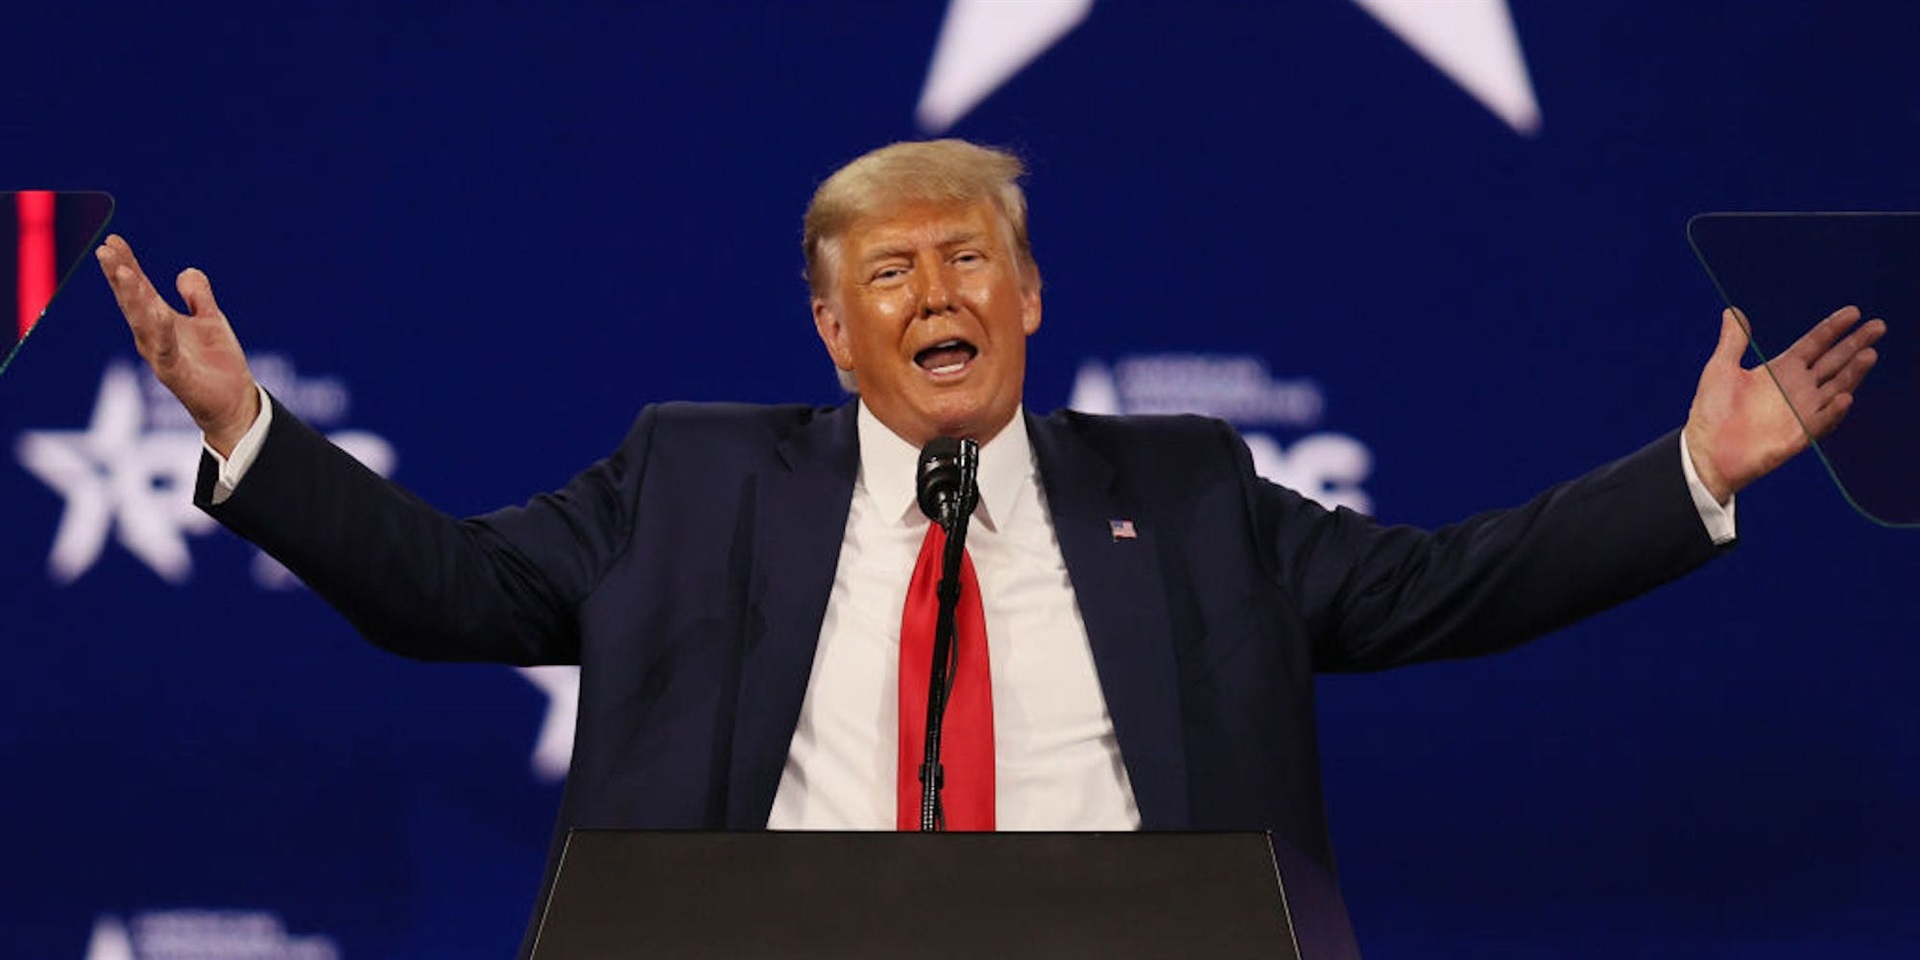 Donald Trump addresses the Conservative Political Action Conference (CPAC) held in the Hyatt Regency on February 28, 2021 in Orlando, Florida.
